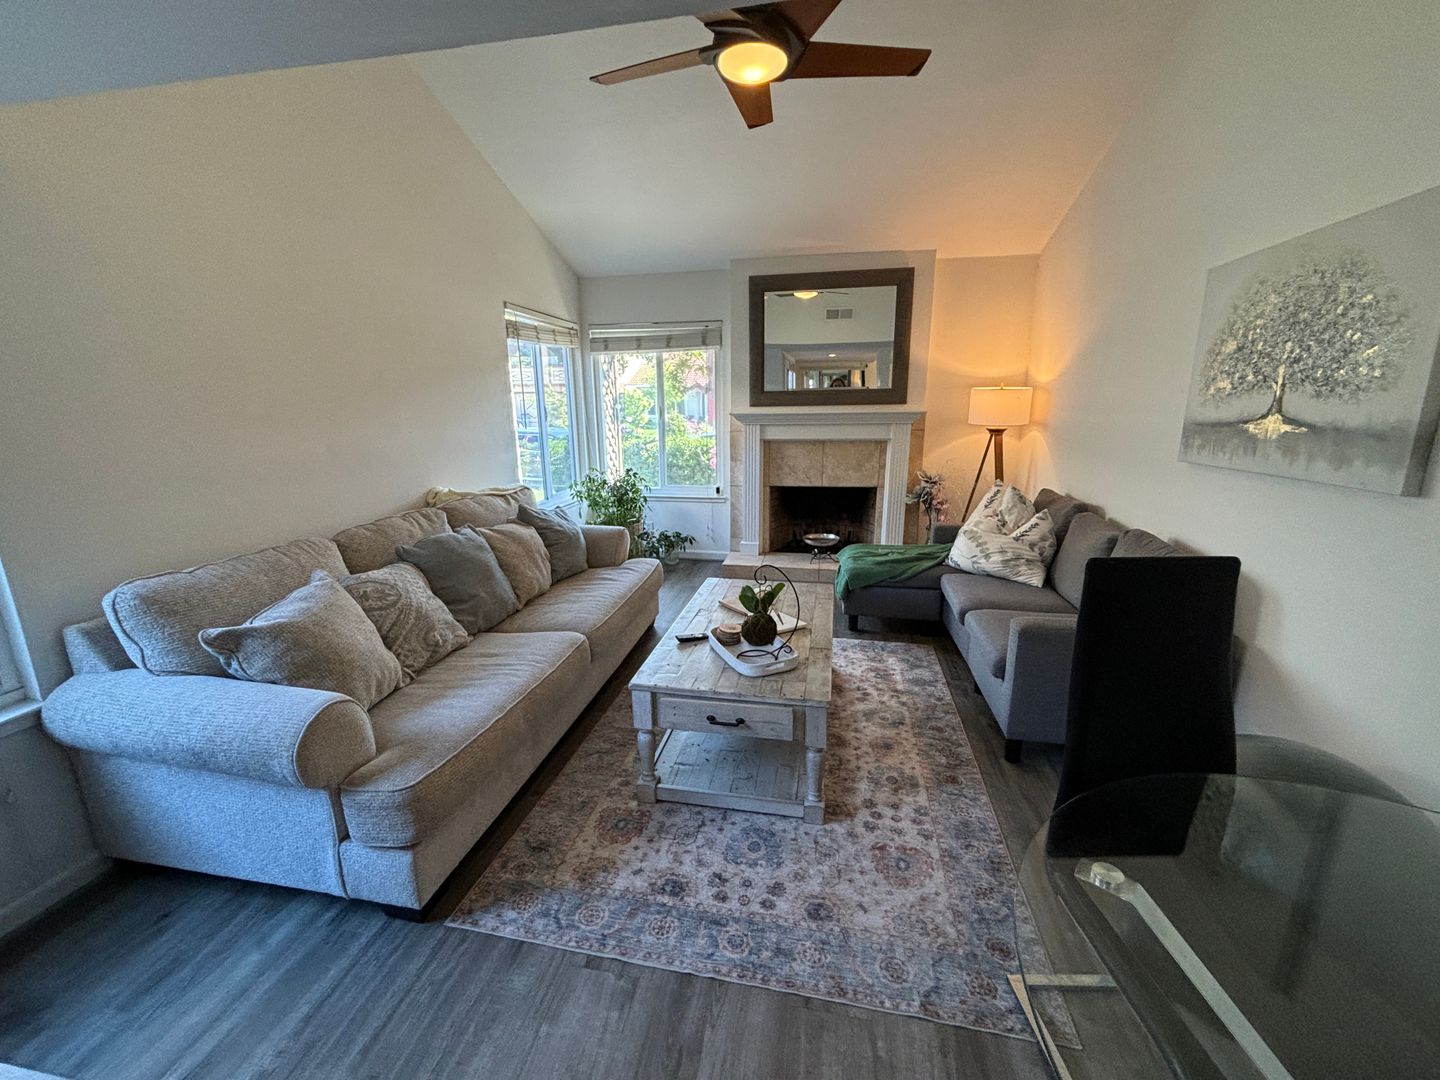 San Jose- beautiful 2/2 home with upgraded lvp flooring and attached garage